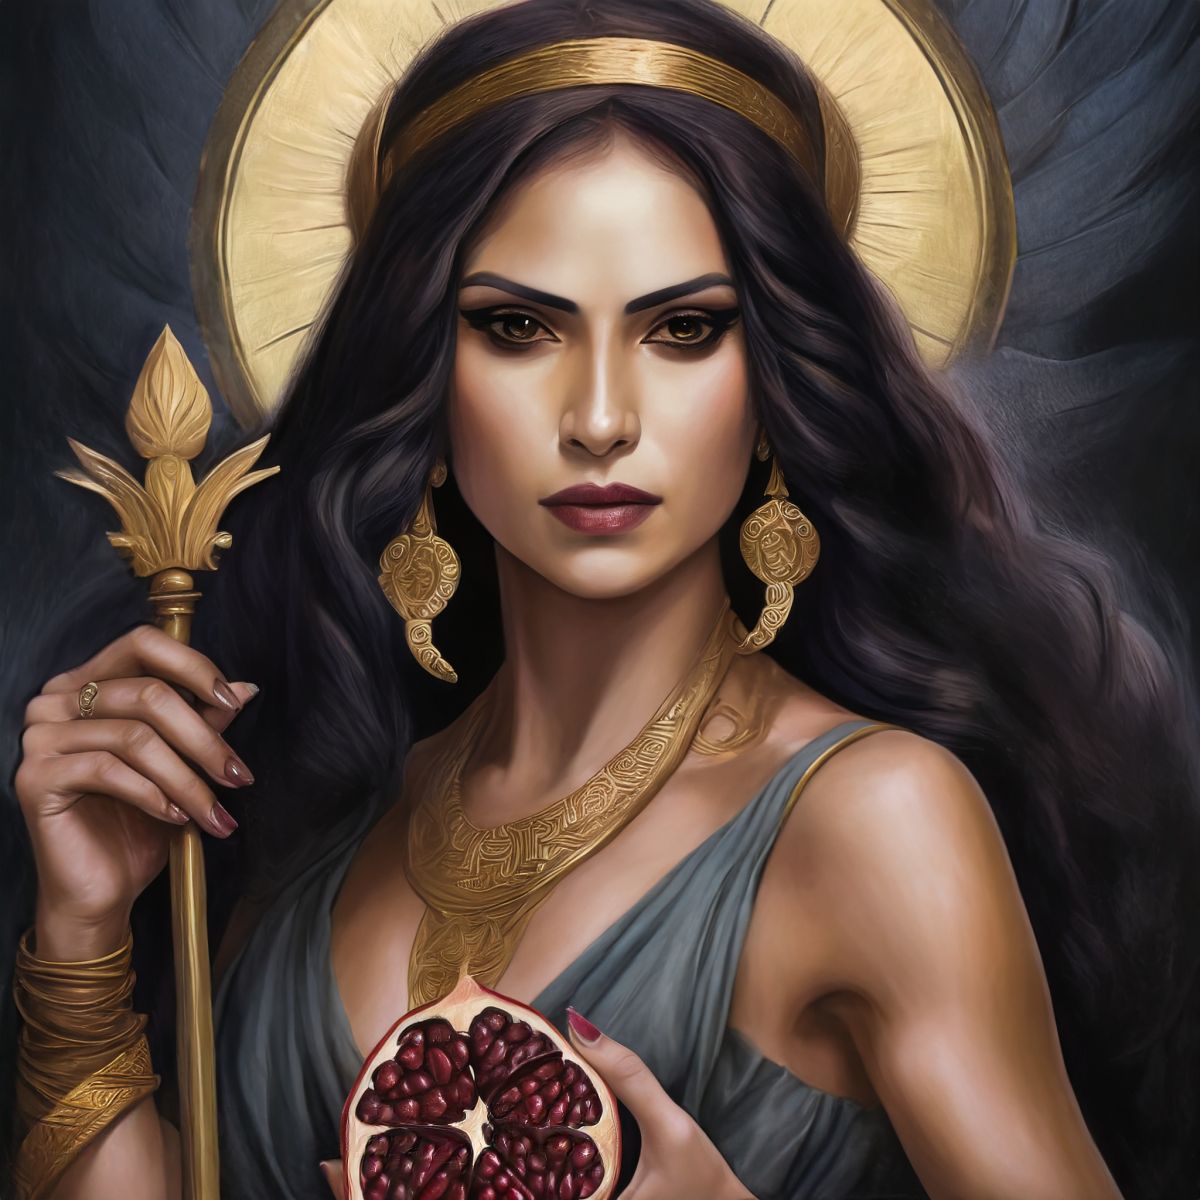 A painting of the Goddess Hera.